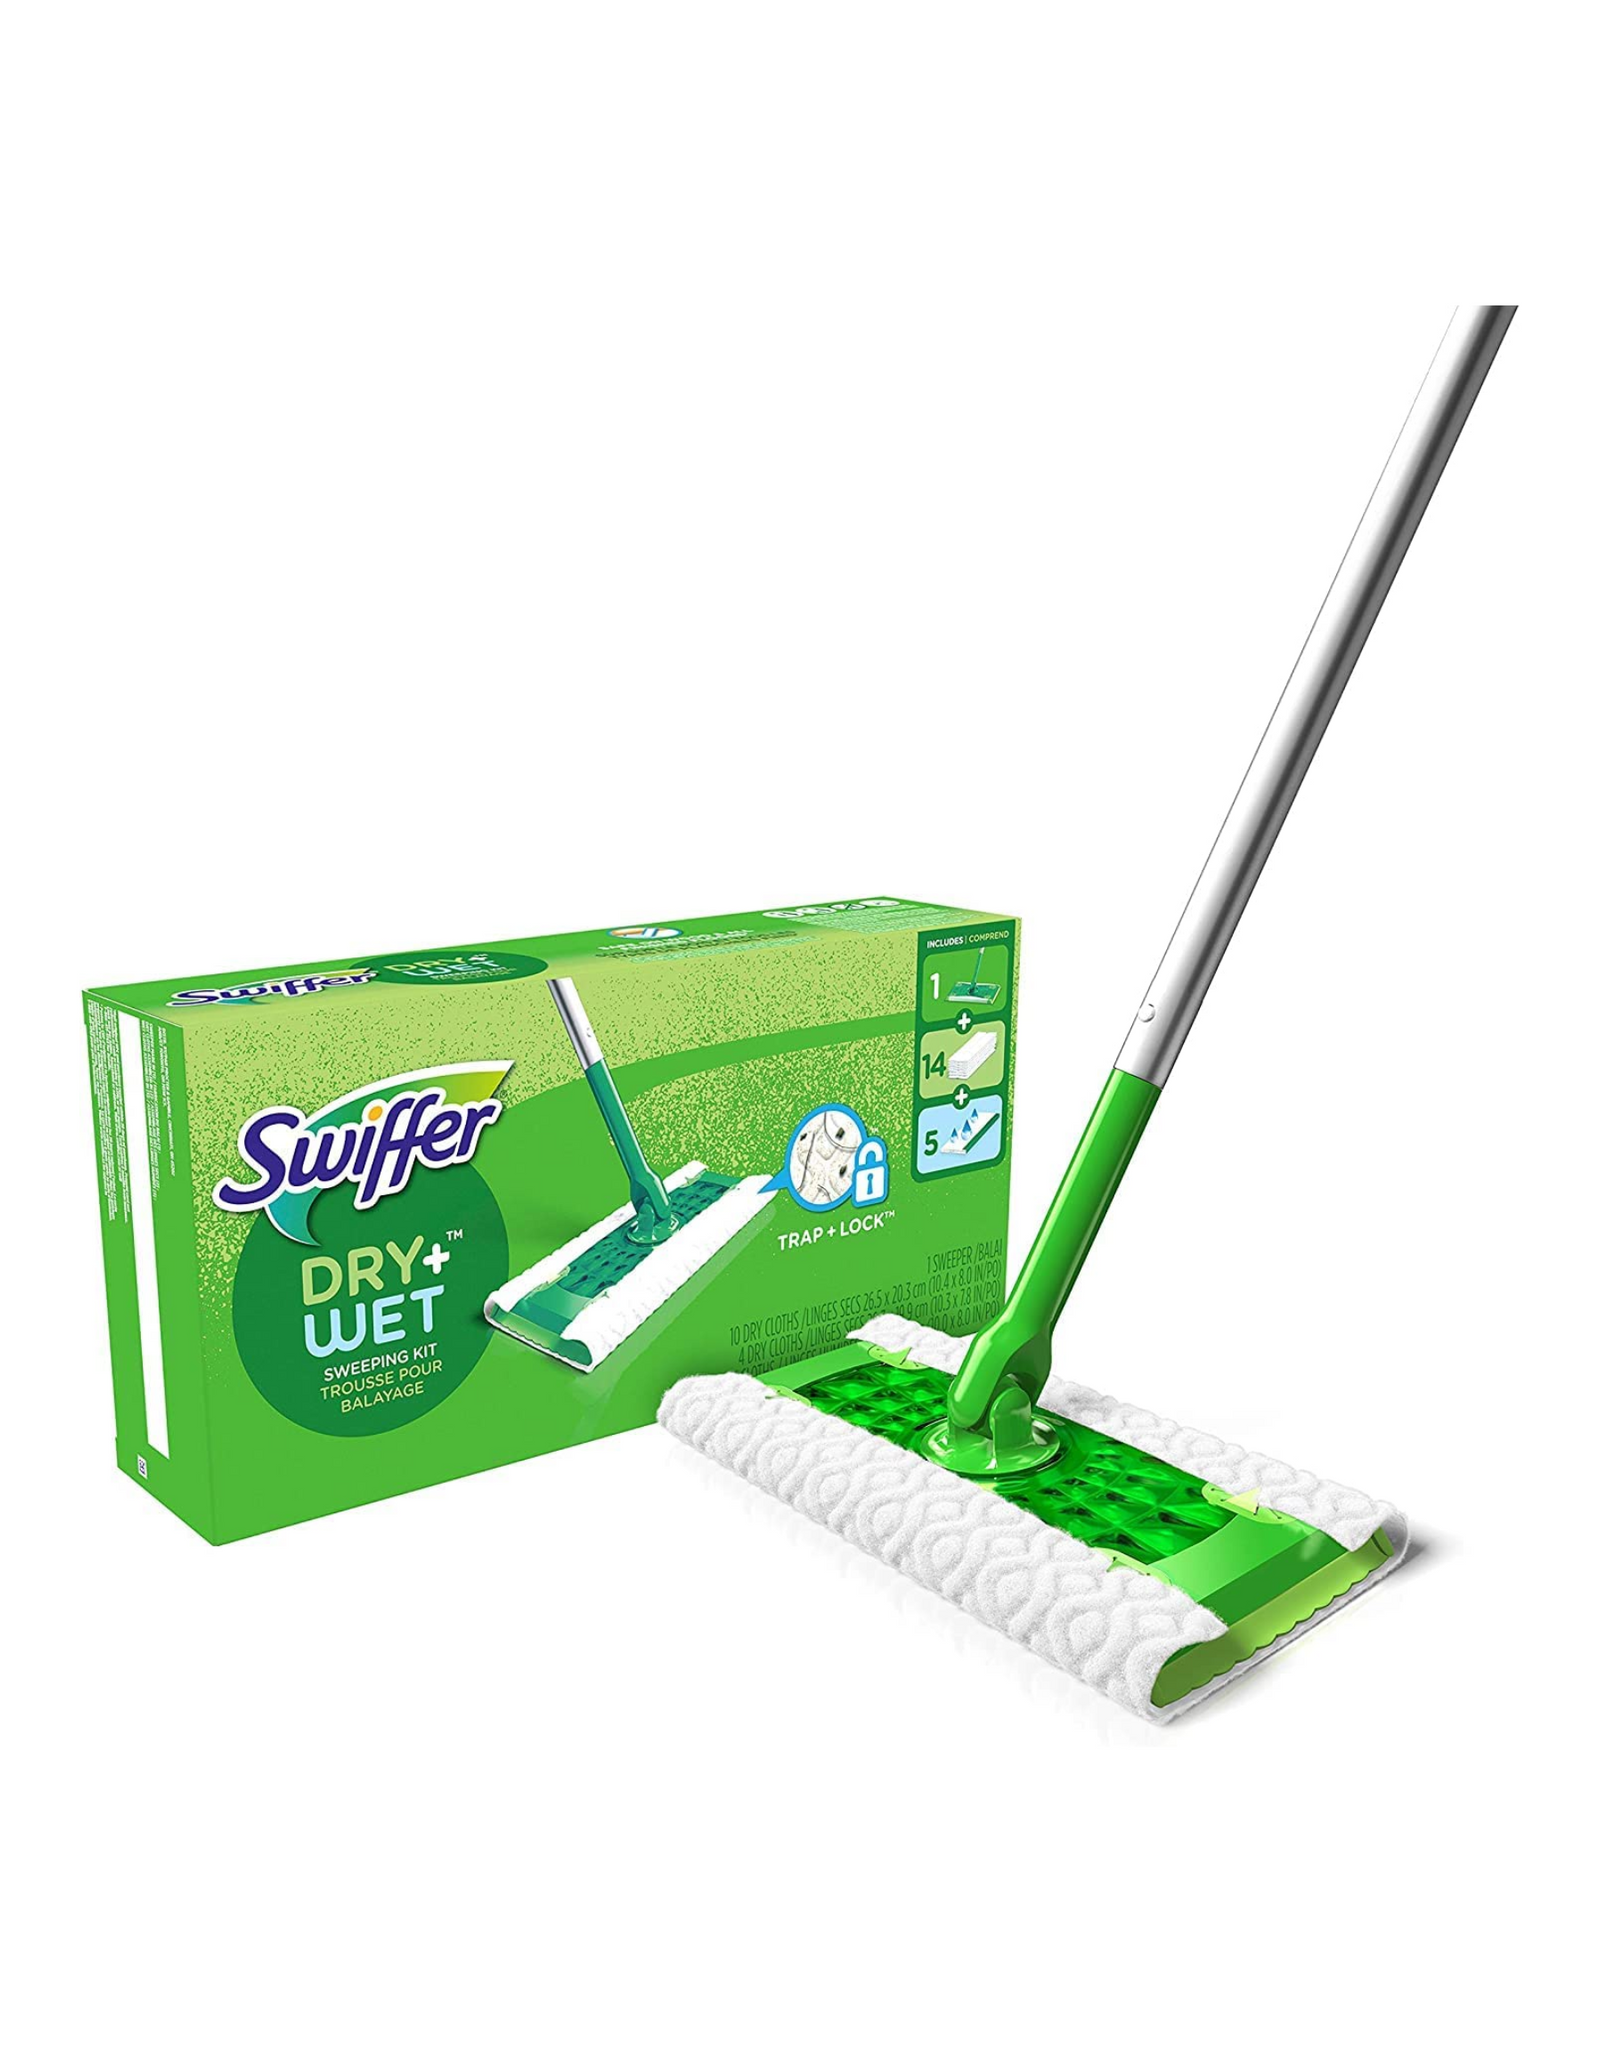 Swiffer Sweeper 2-in-1 Mops for Floor Cleaning, Dry and Wet Multi Surface Floor Cleaner, Includes 1 Mop + 19 Refills, 20 Piece Set